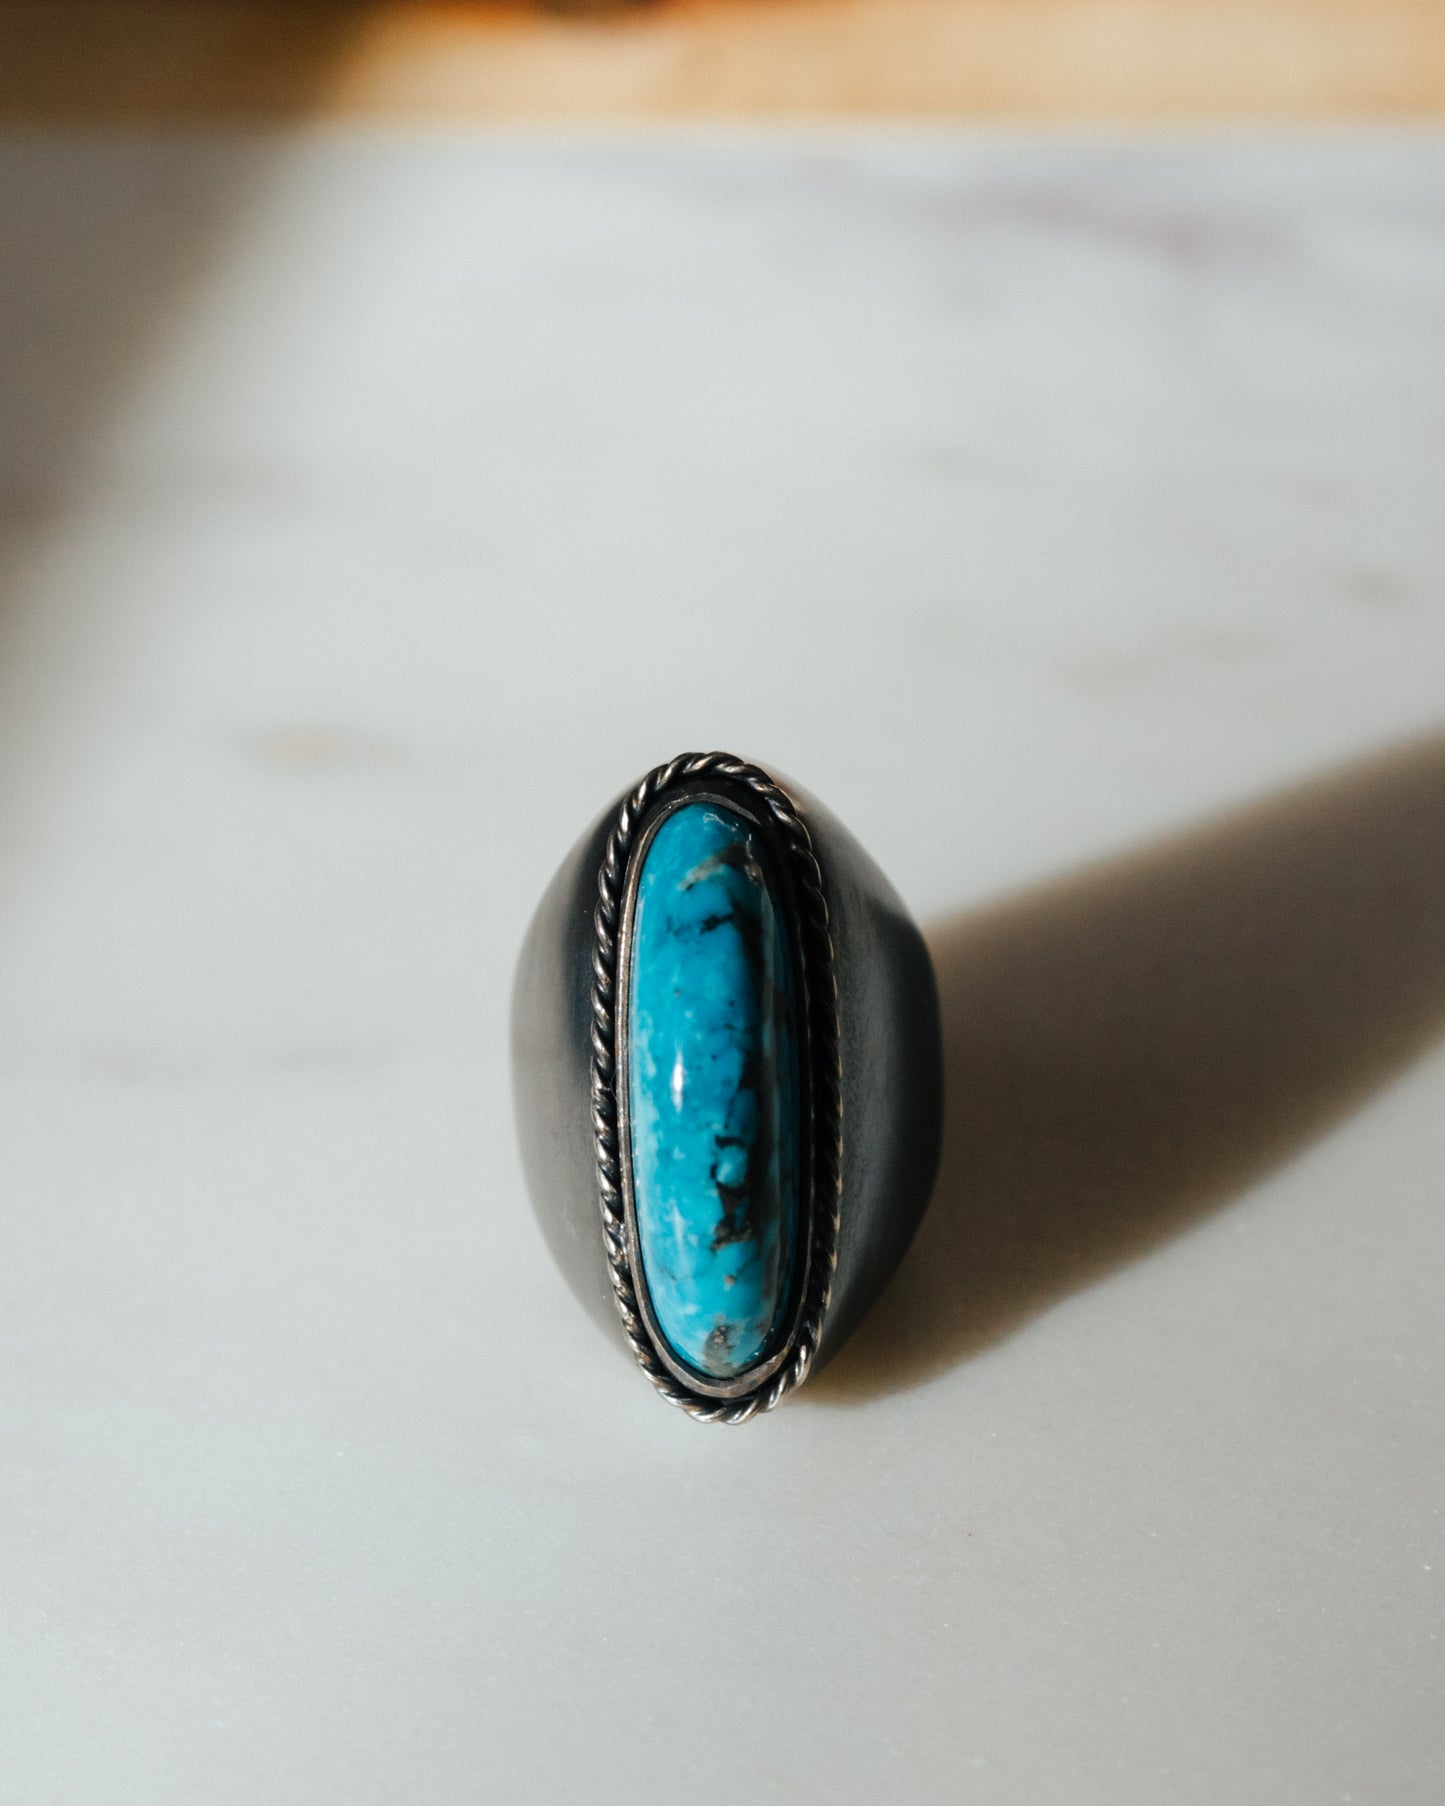 Shallows Ring - One of a Kind